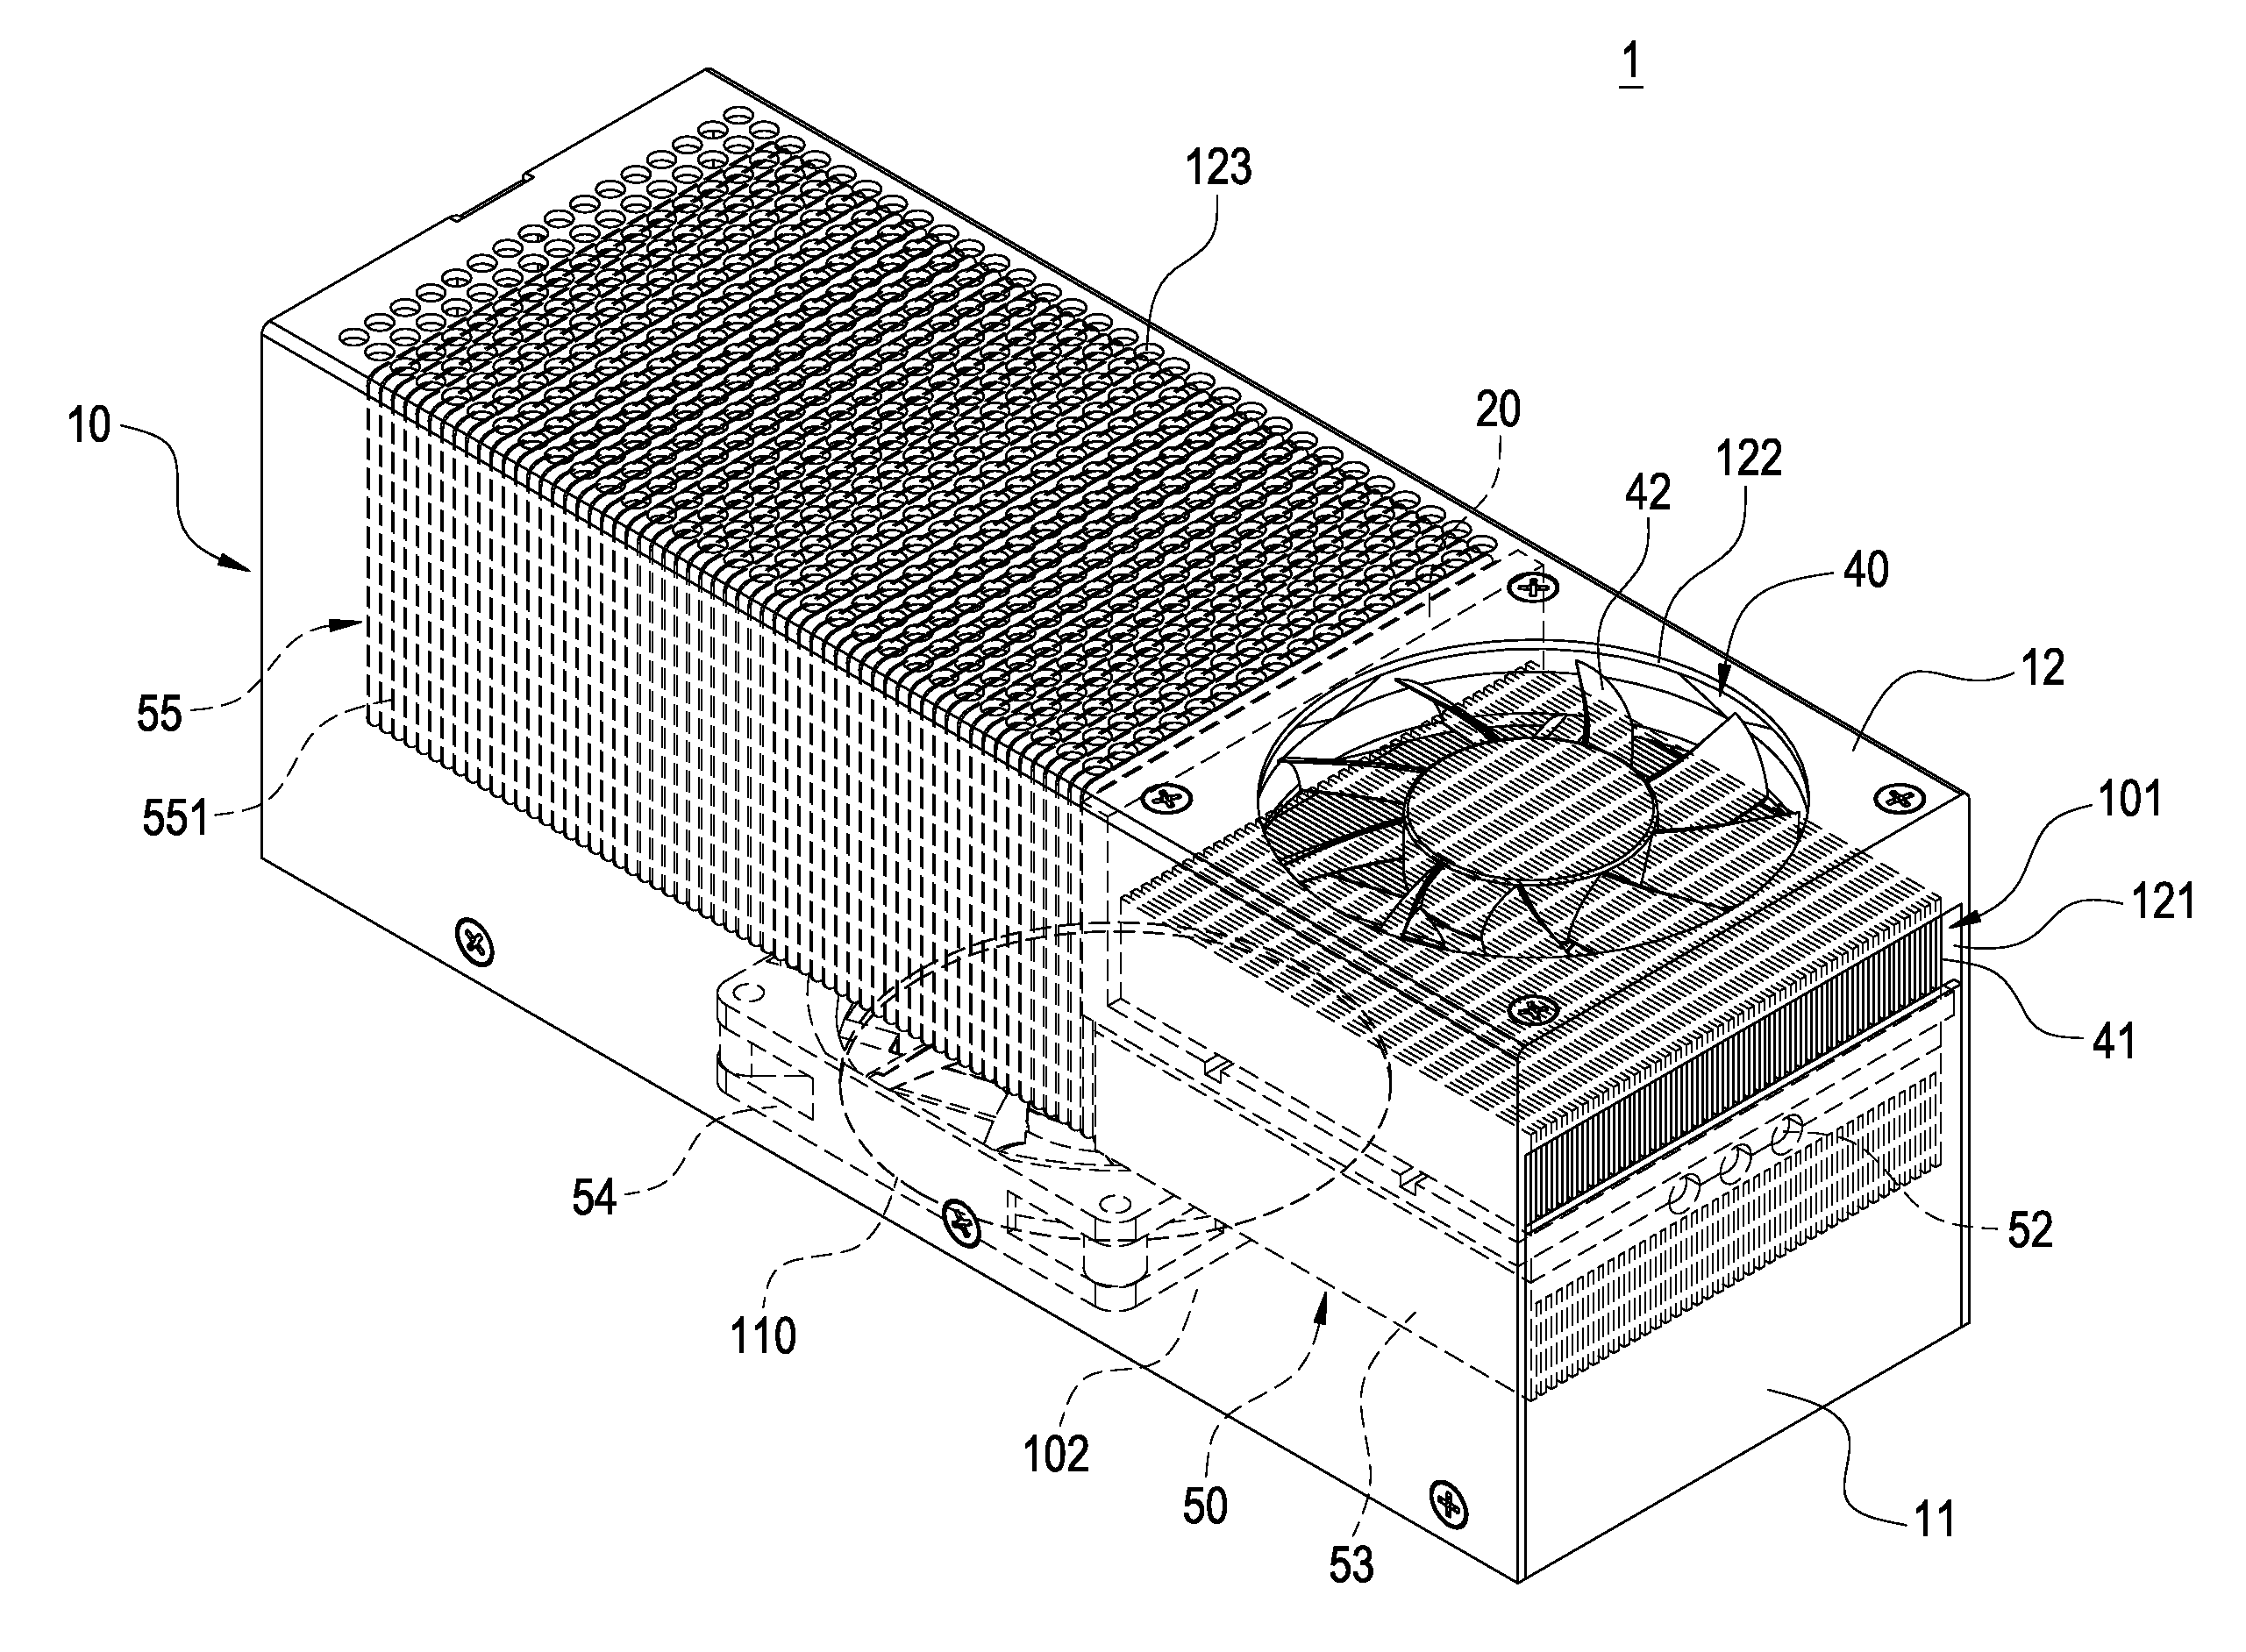 Heat-Dissipating Device For Supplying Cold Airflow